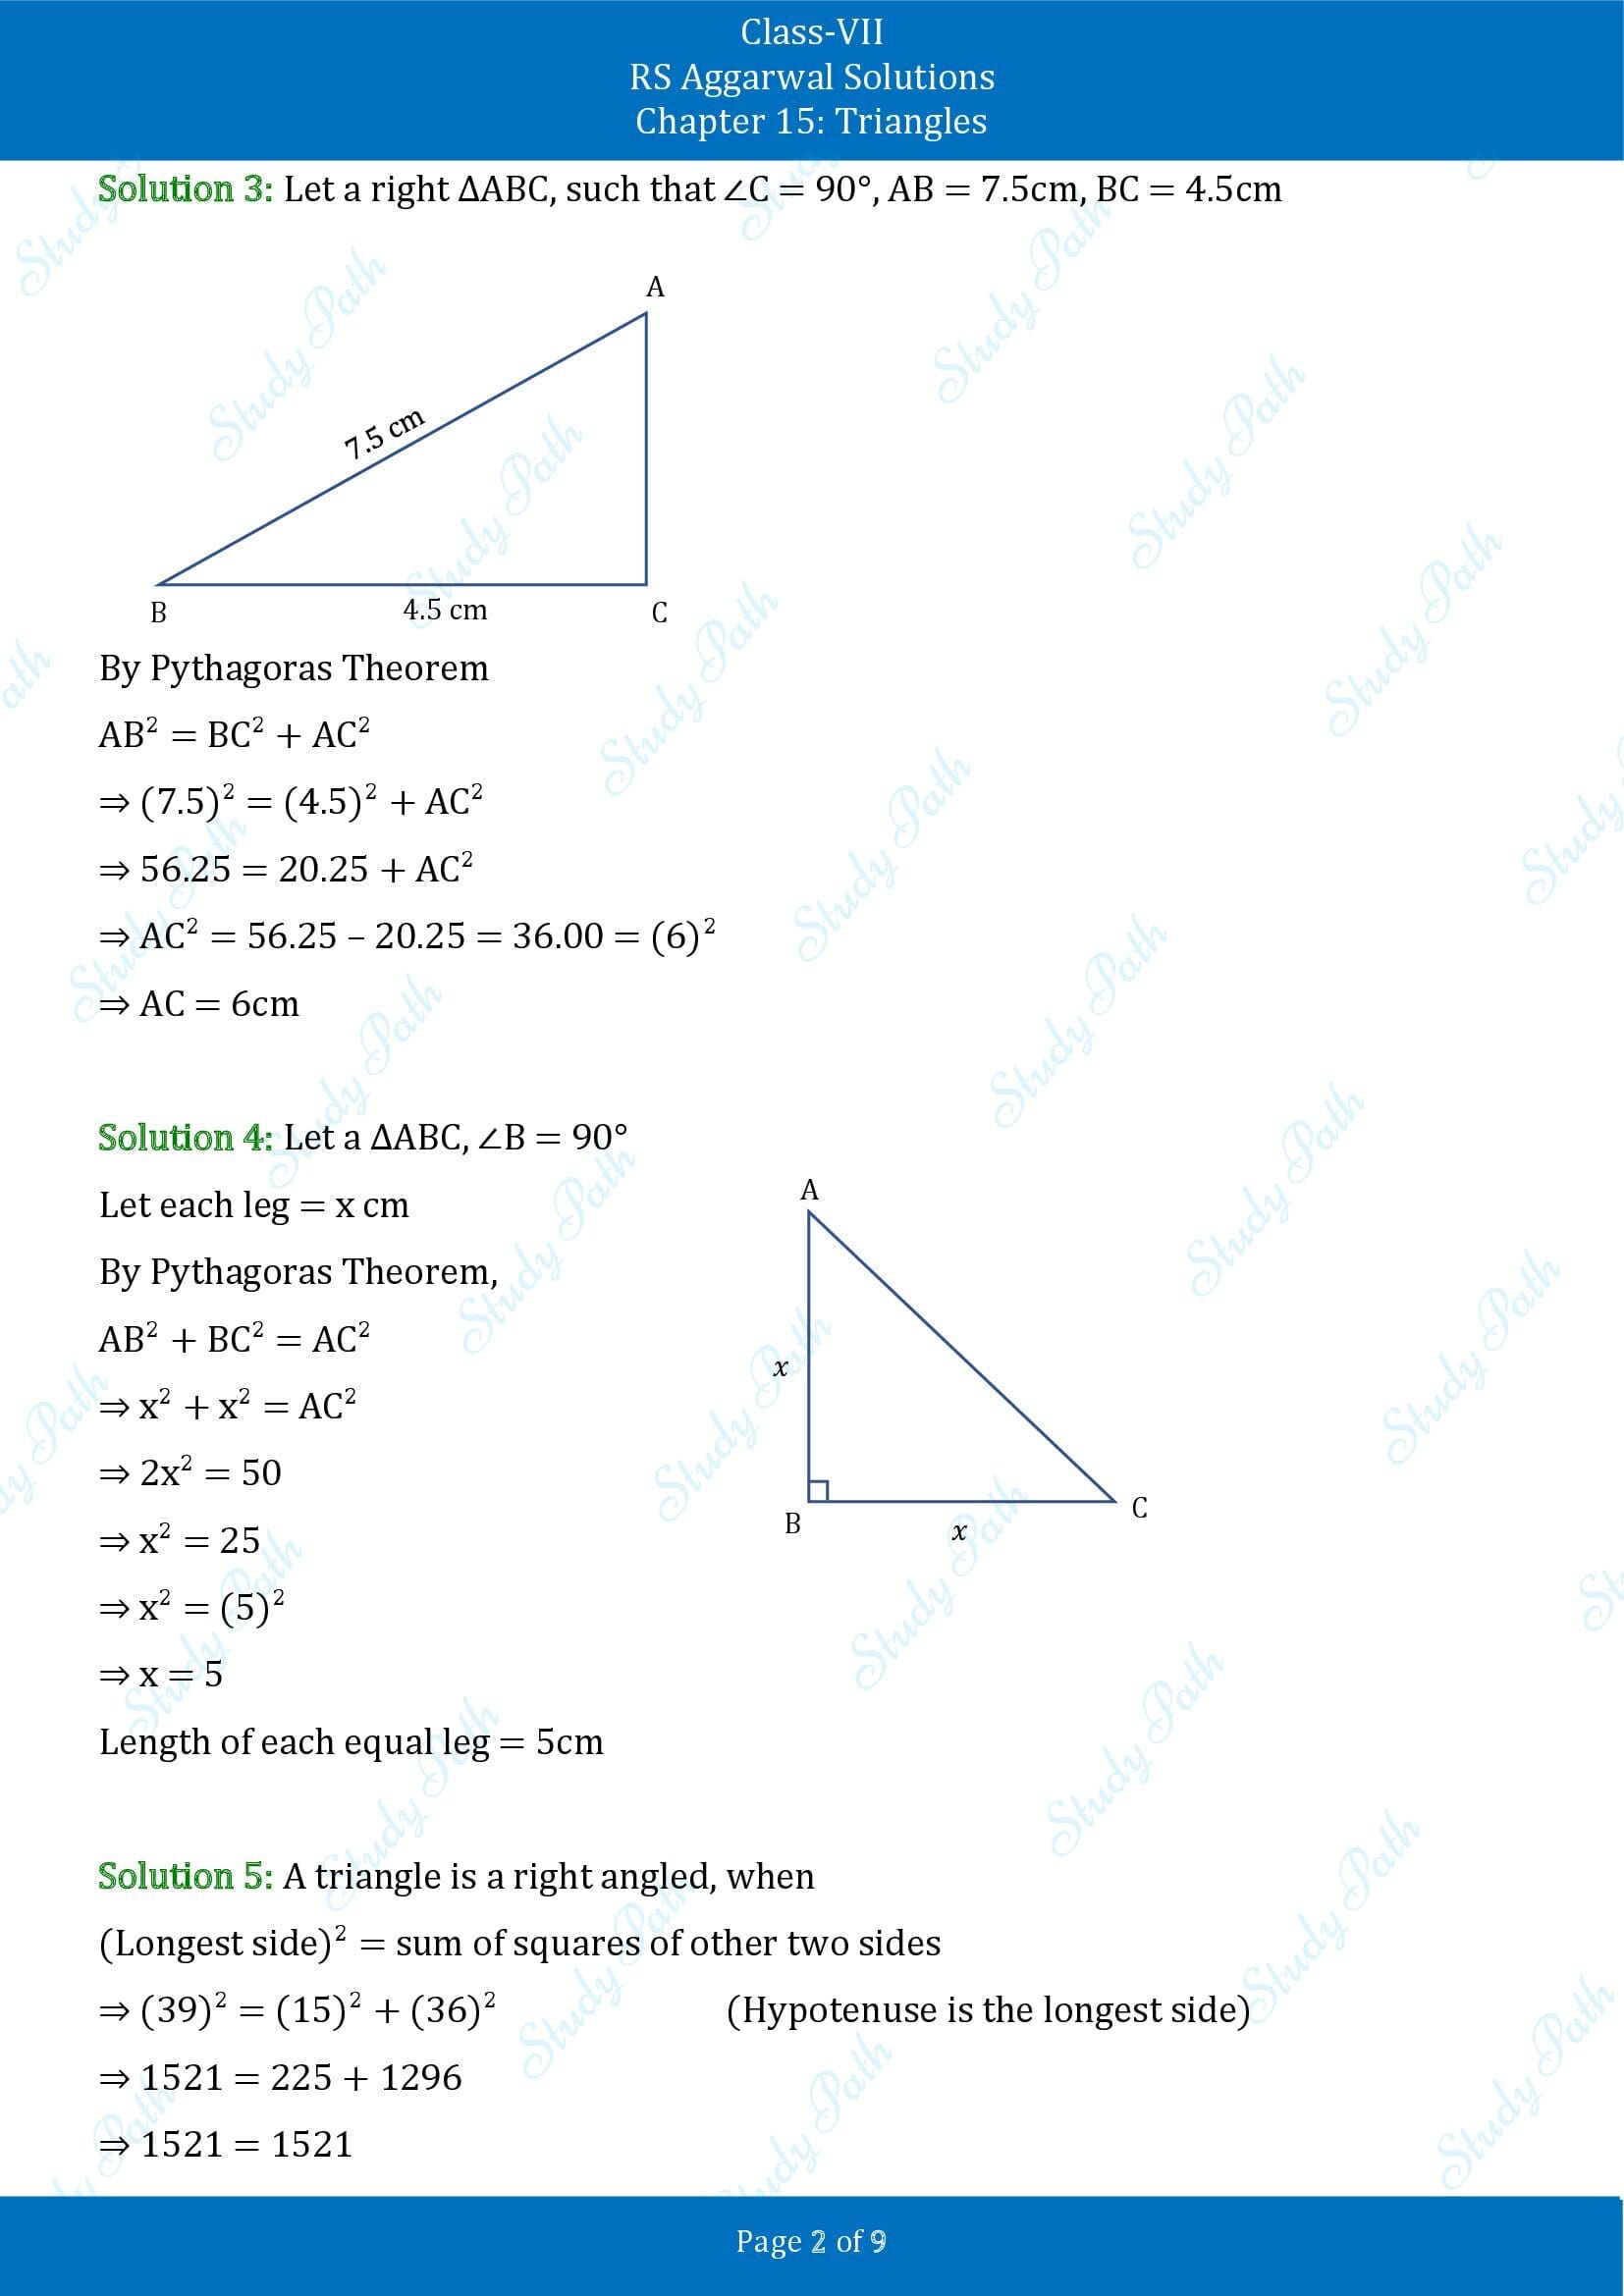 RS Aggarwal Solutions Class 7 Chapter 15 Triangles Exercise 15D 00002